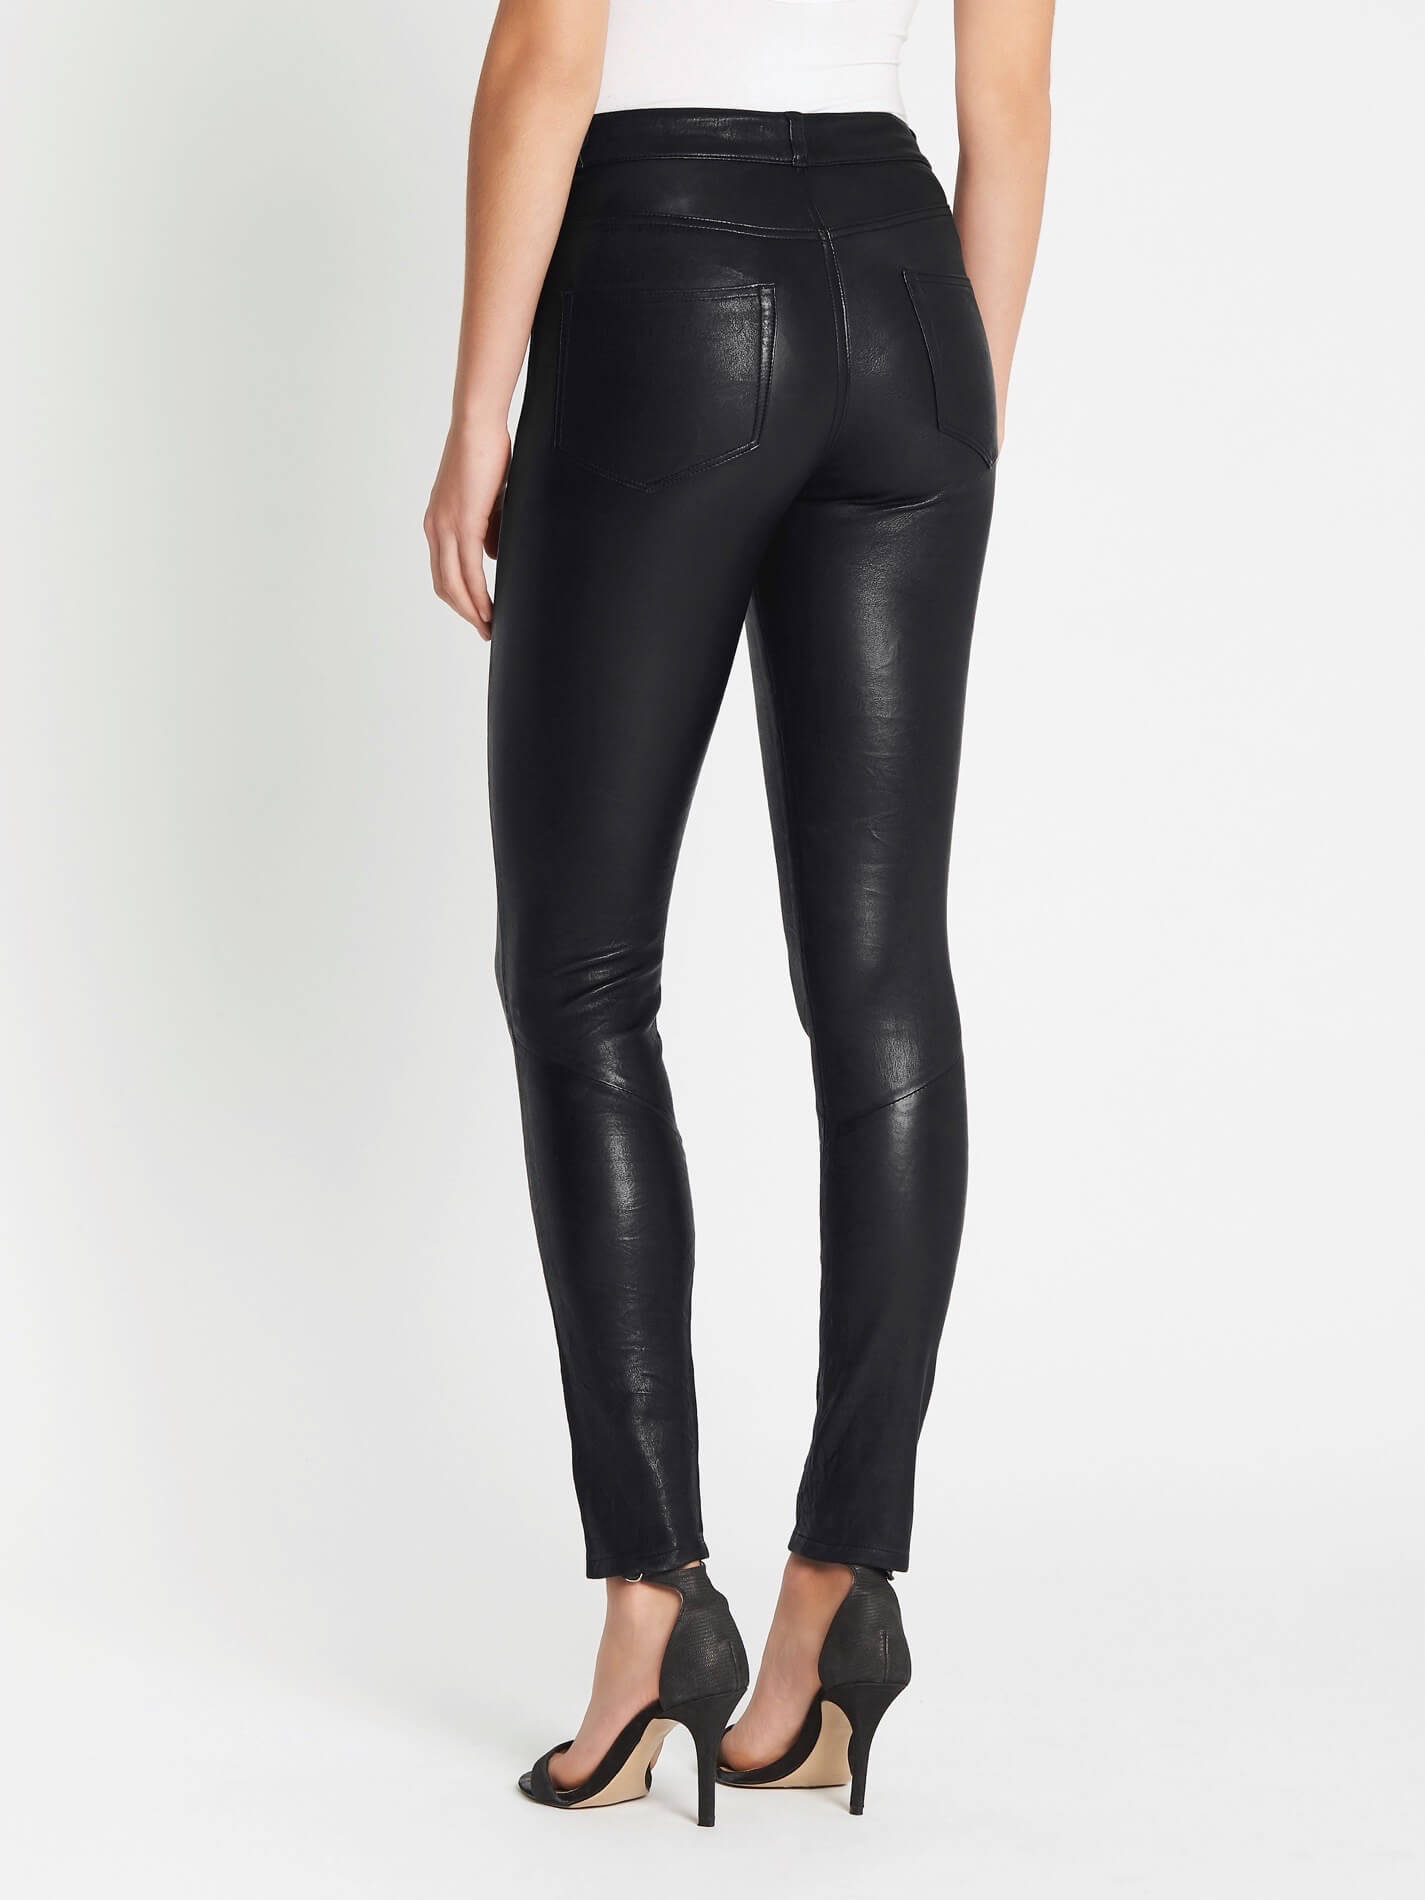 Paige Hoxton Stretch Leather Pant in Black – Order Of Style